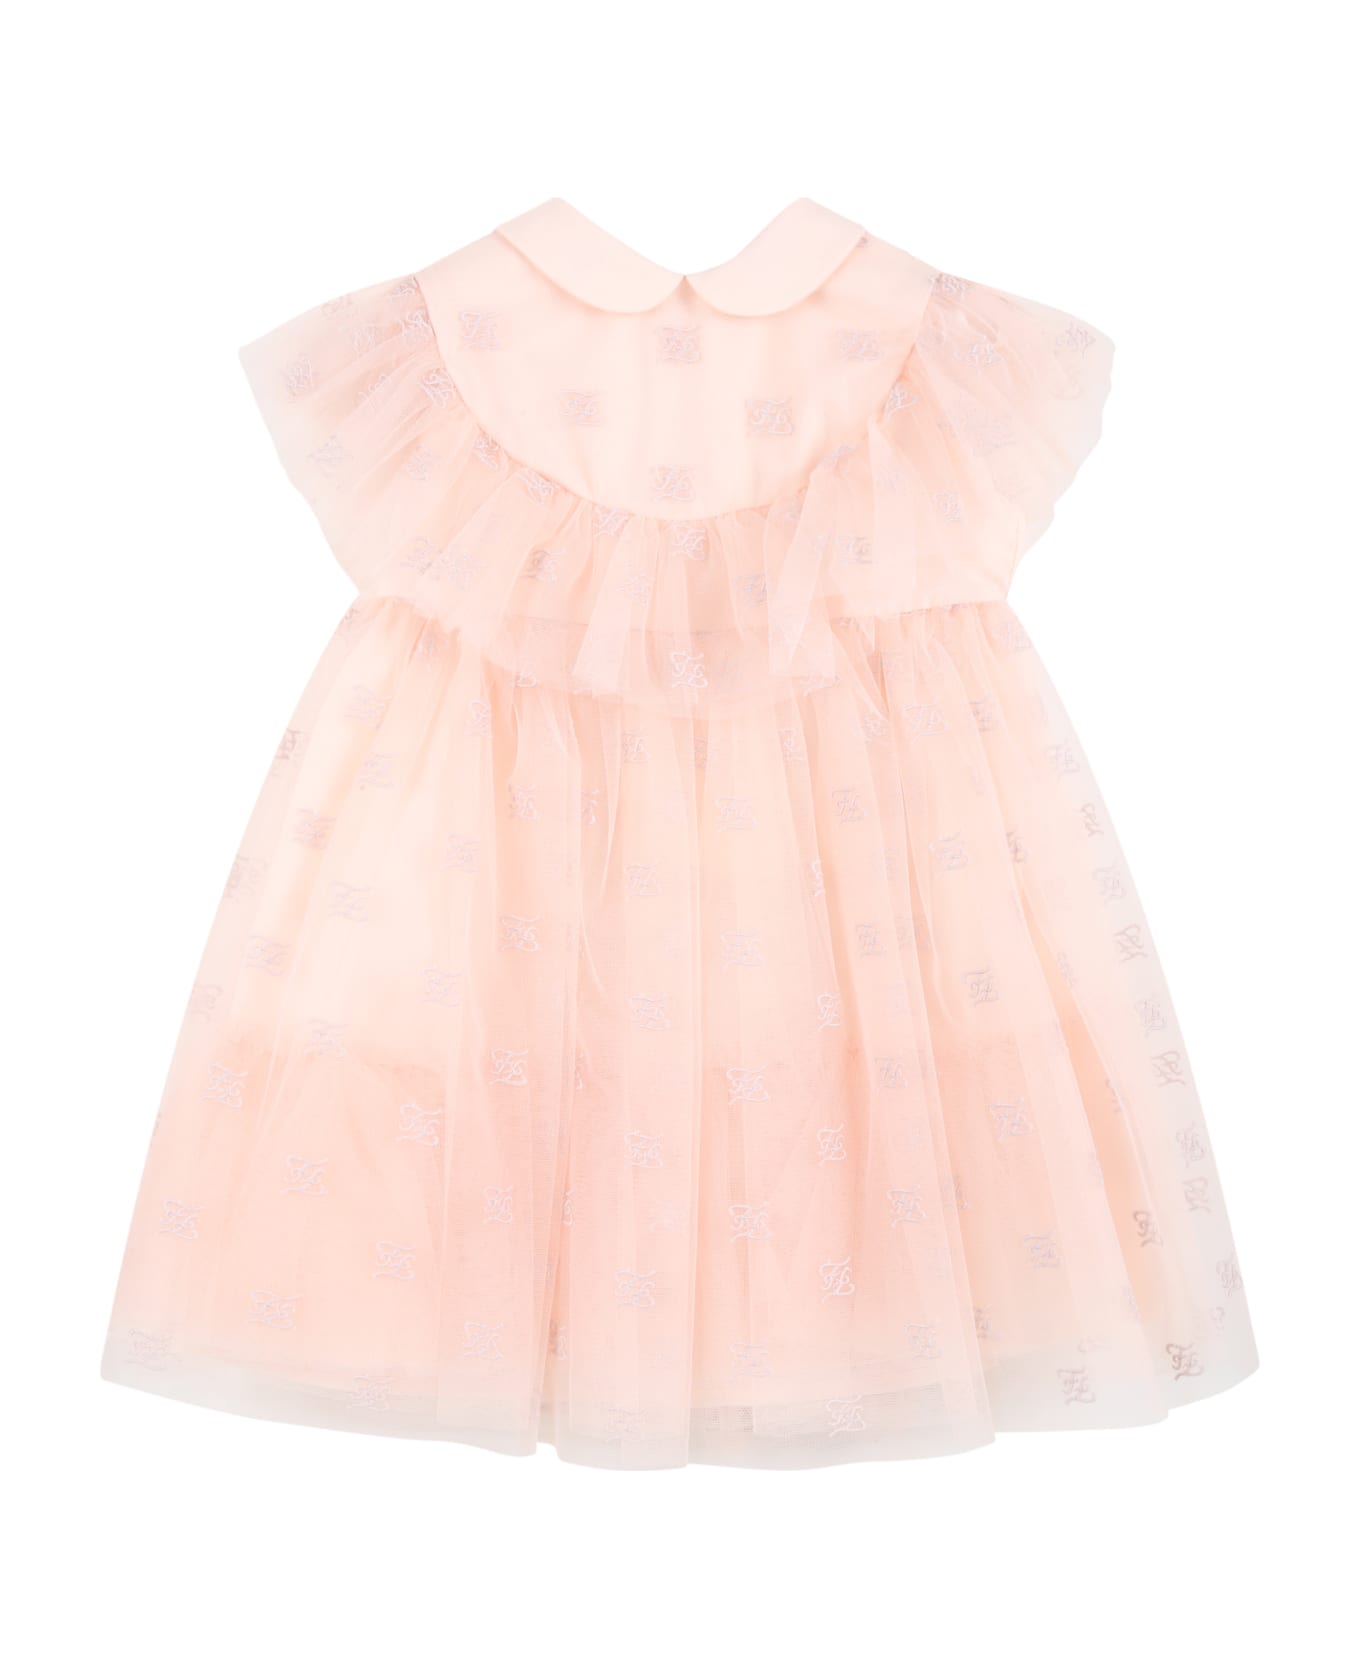 Fendi Pink Dress For Baby Girl With Embroidered Logo - Pink